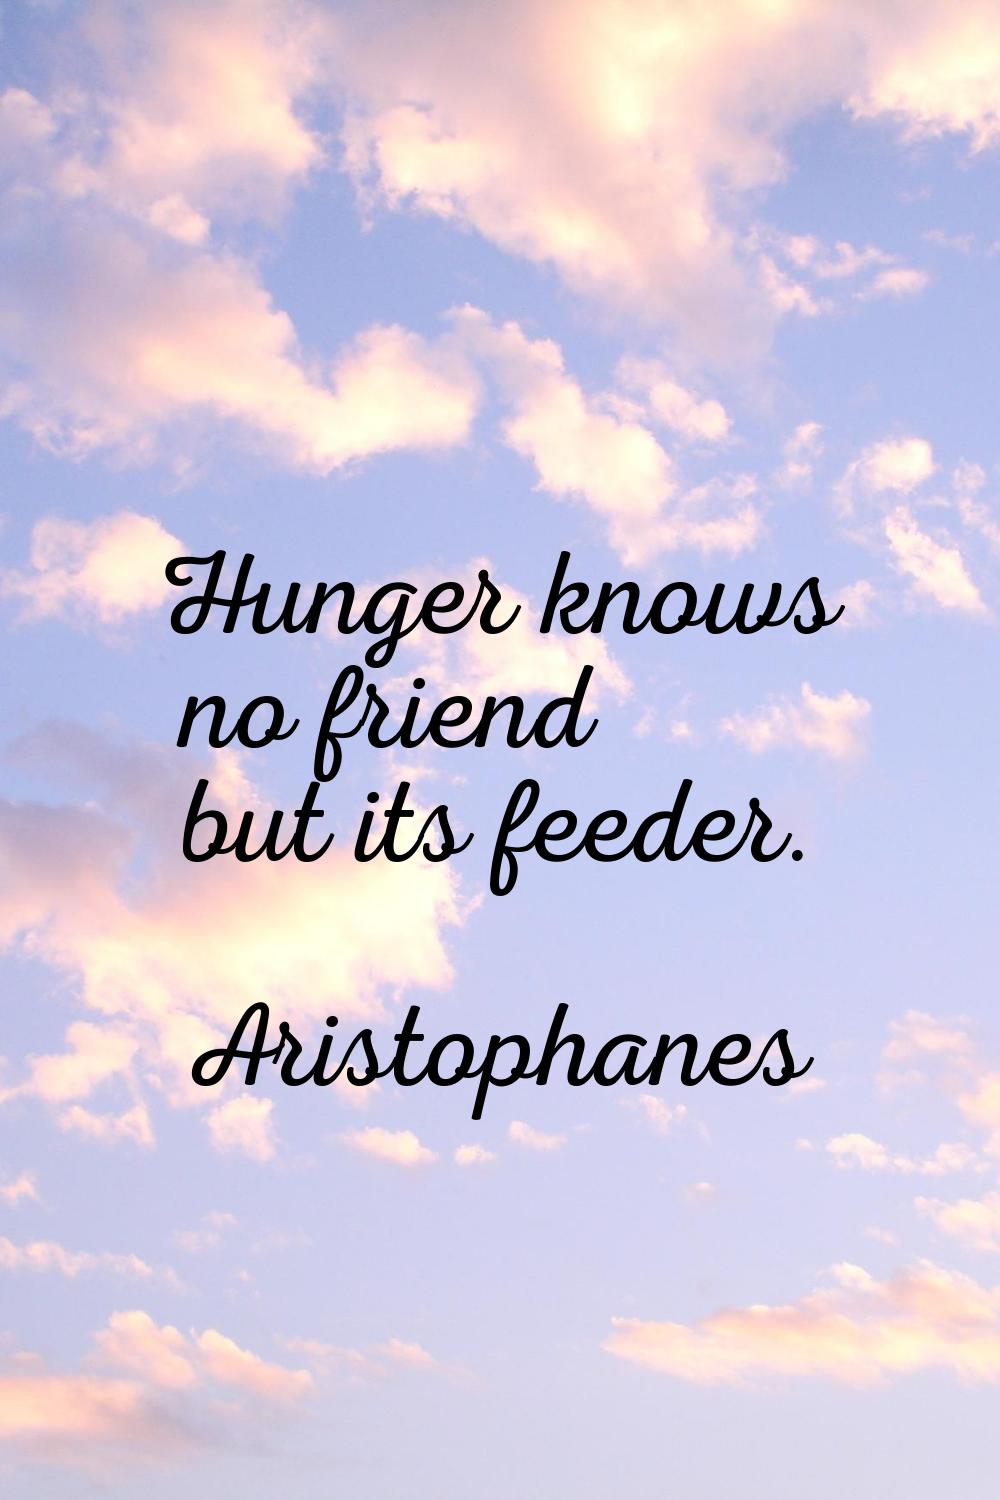 Hunger knows no friend but its feeder.